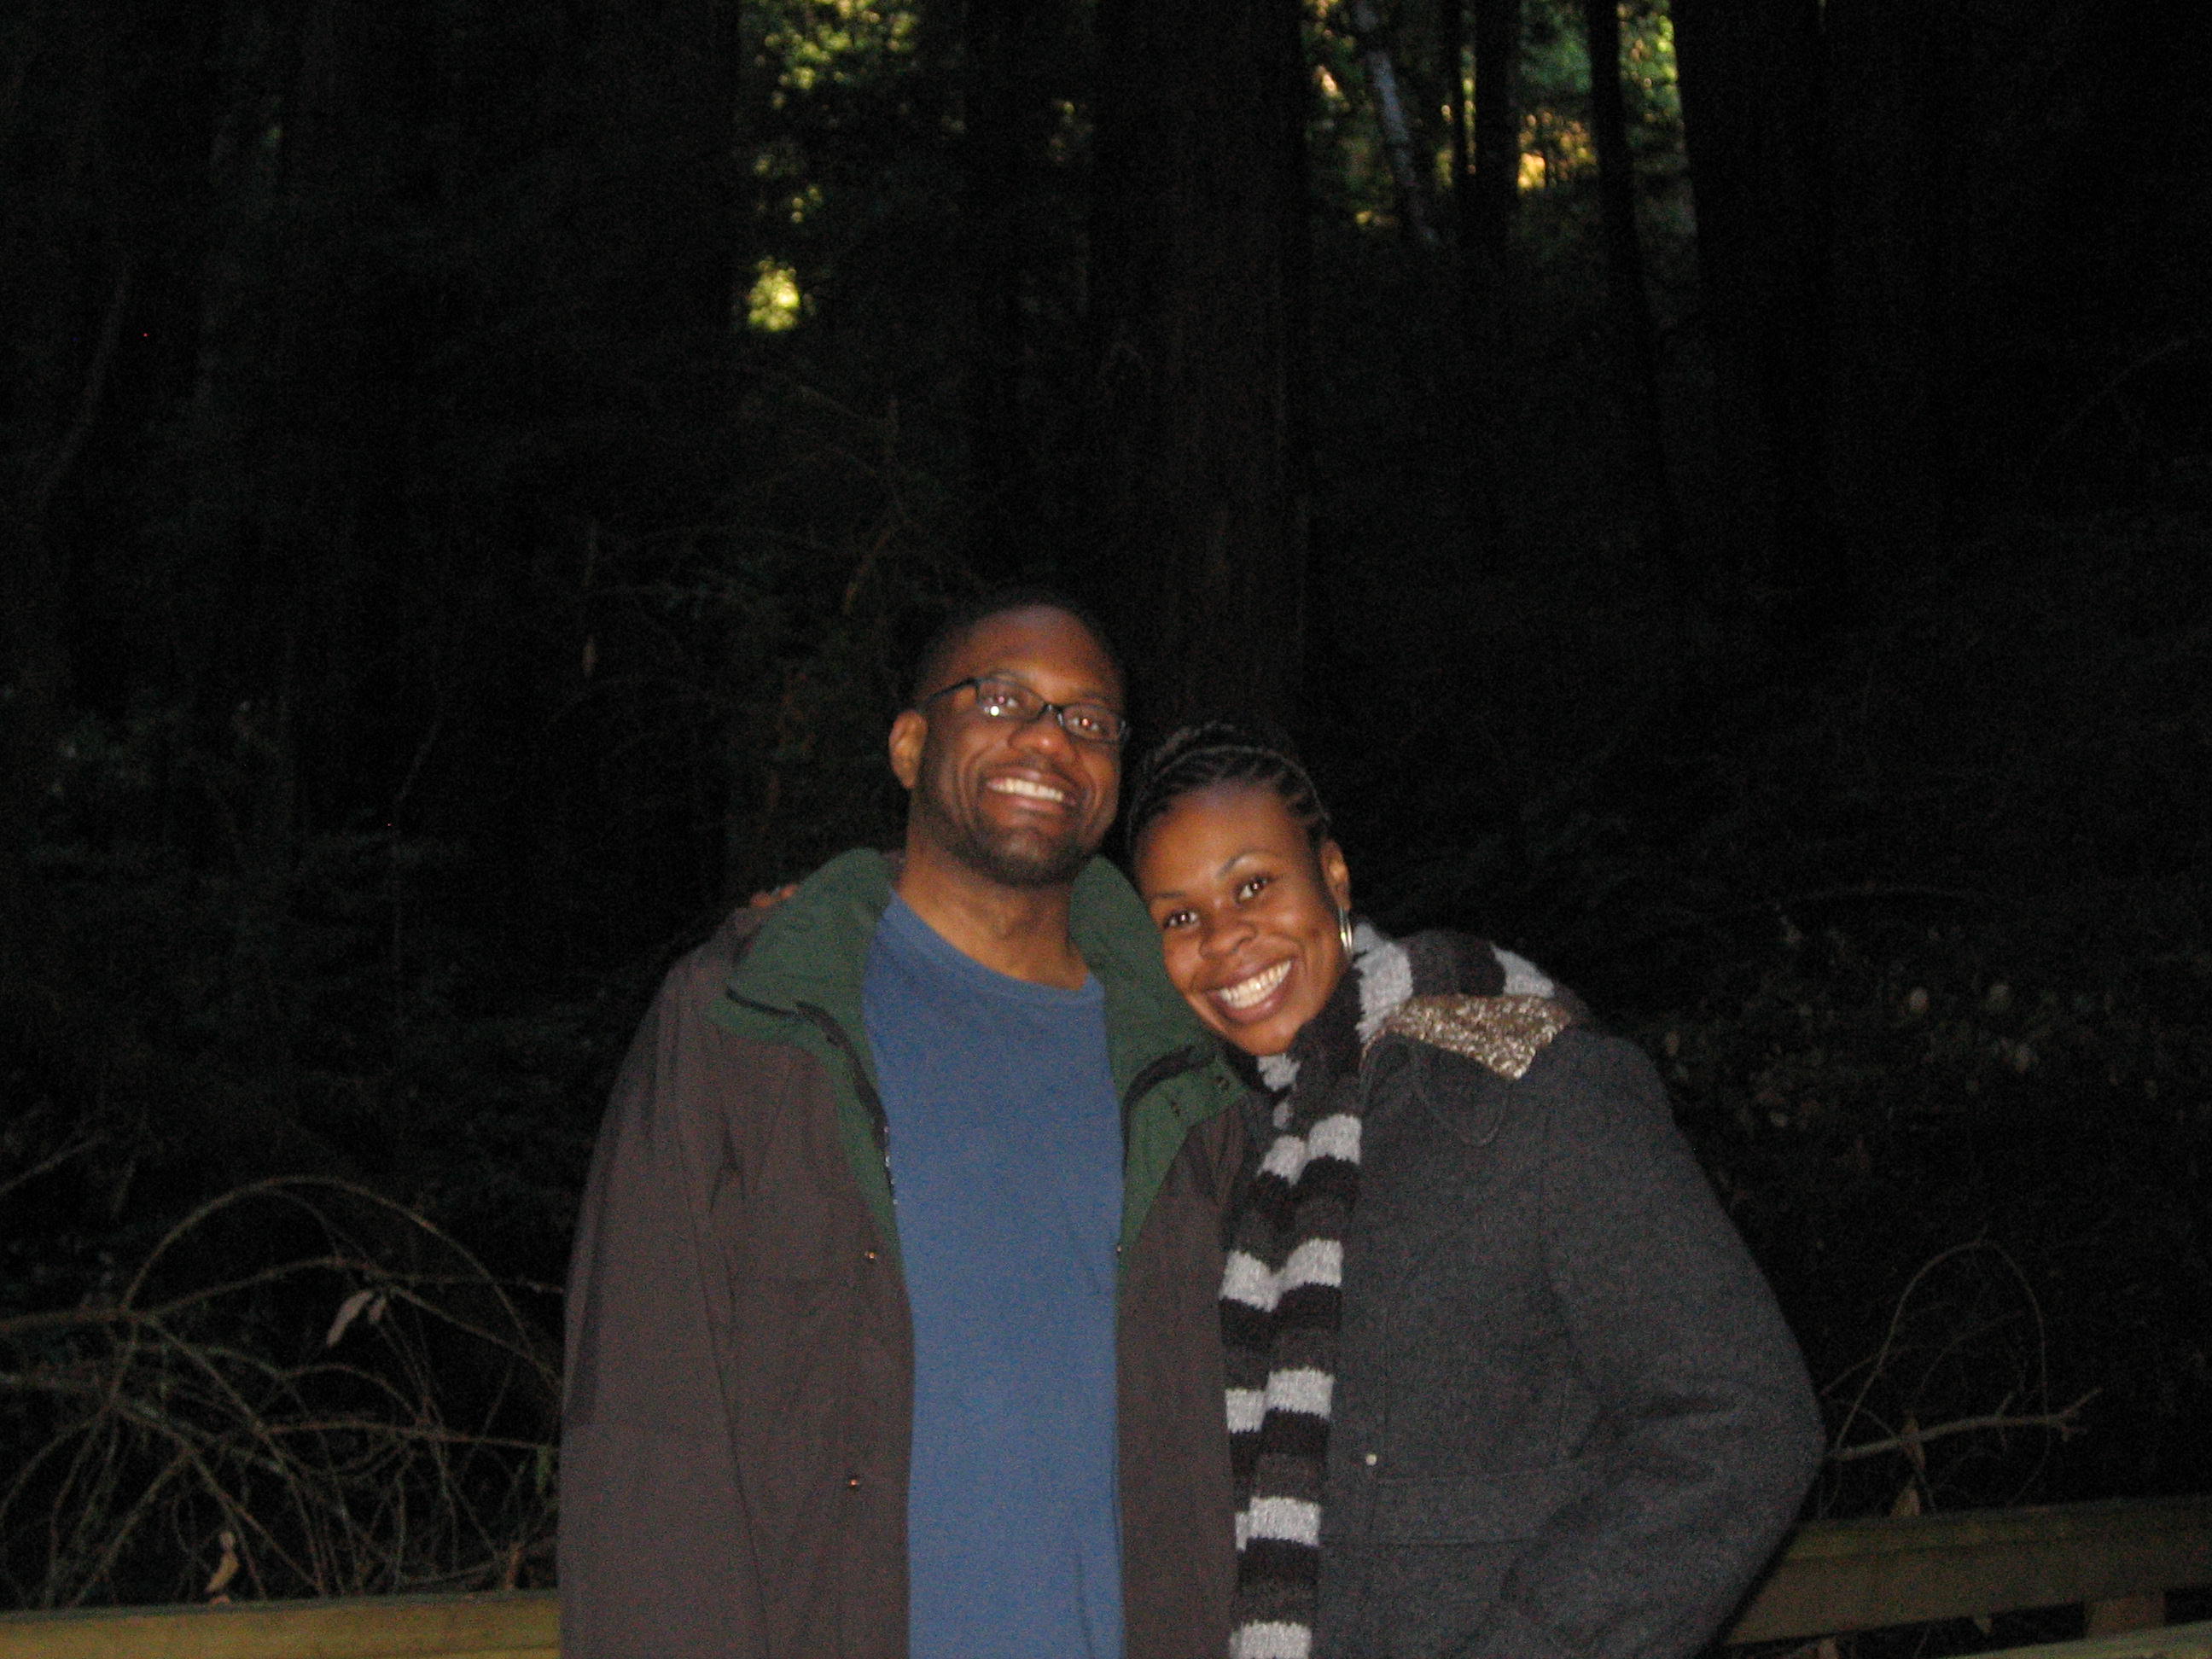 Thorpe and his wife Triscia hiking in the Muir Woods in California.